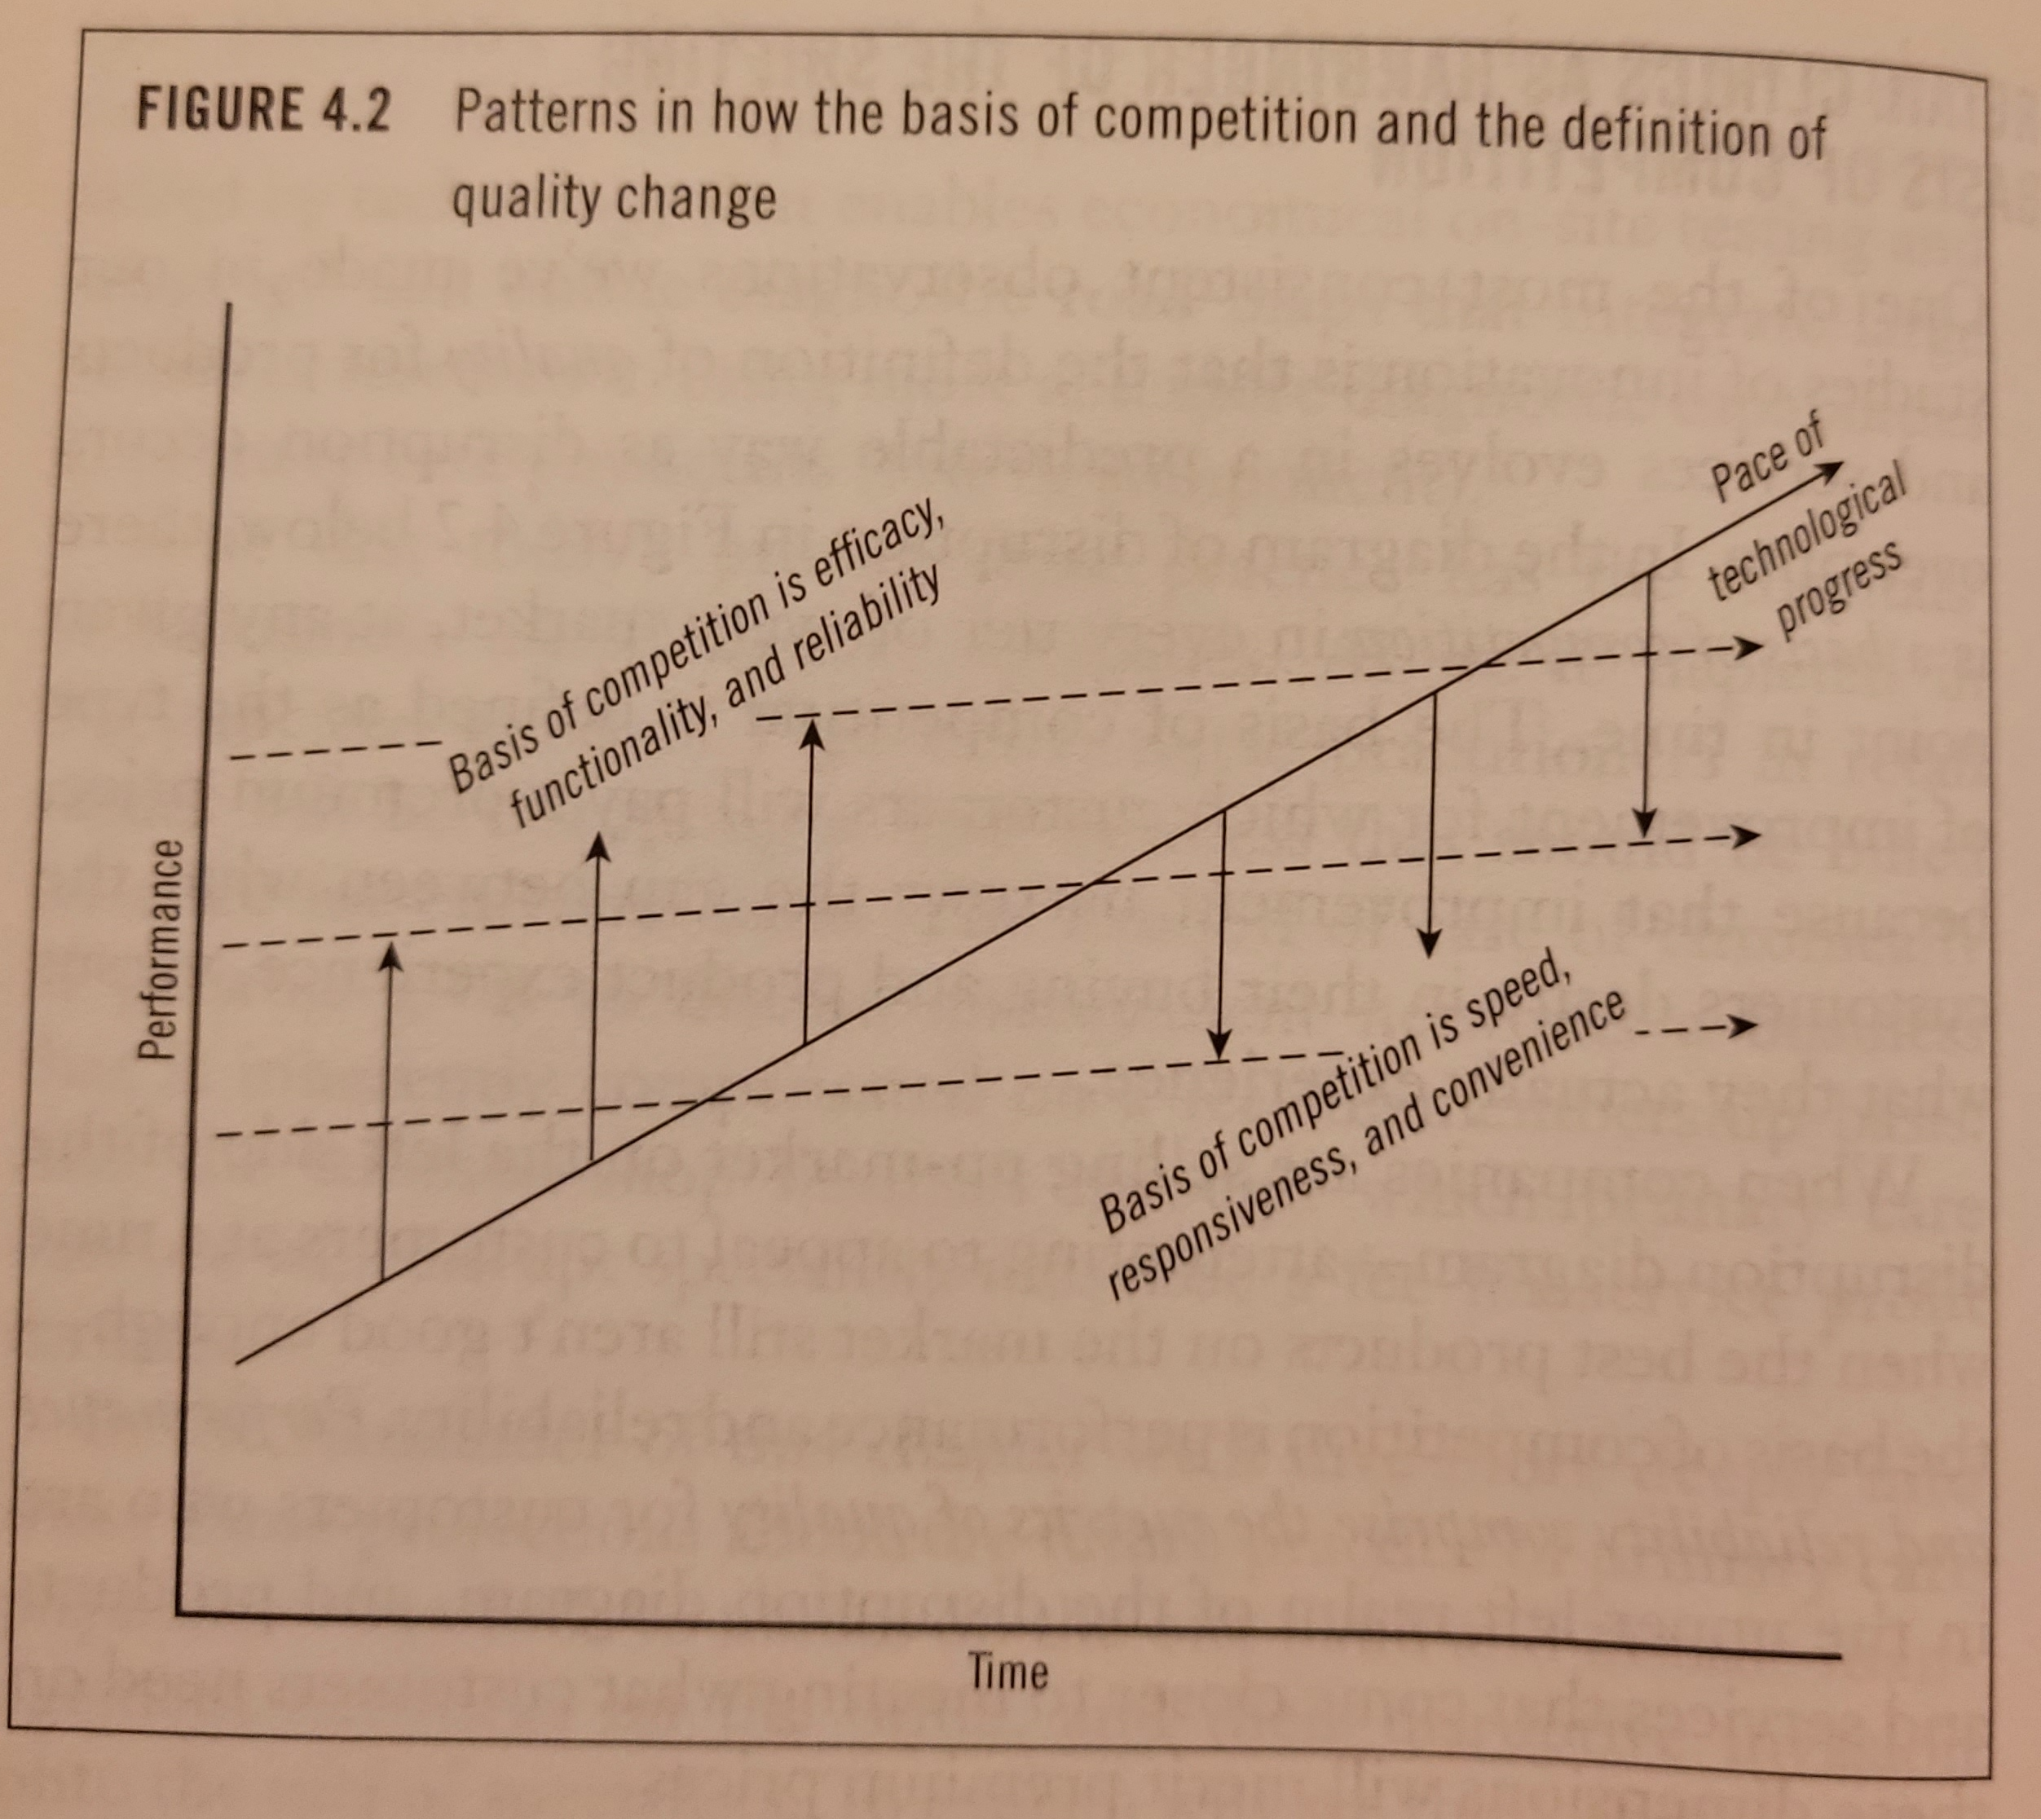 Patterns in how the basis of competition and the definition of quality change